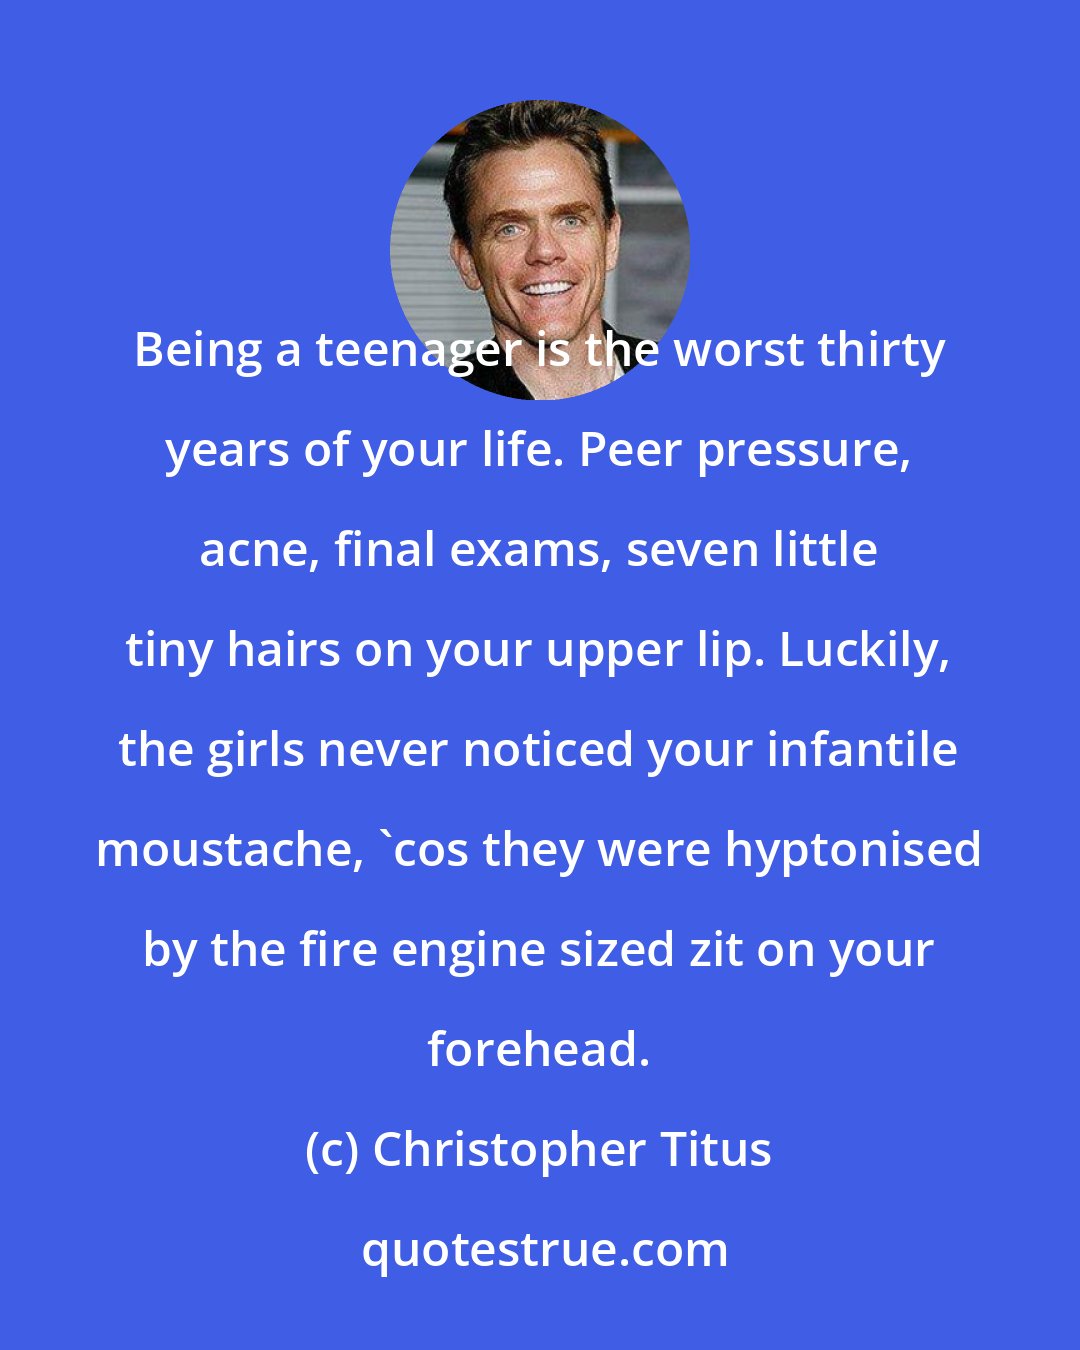 Christopher Titus: Being a teenager is the worst thirty years of your life. Peer pressure, acne, final exams, seven little tiny hairs on your upper lip. Luckily, the girls never noticed your infantile moustache, 'cos they were hyptonised by the fire engine sized zit on your forehead.